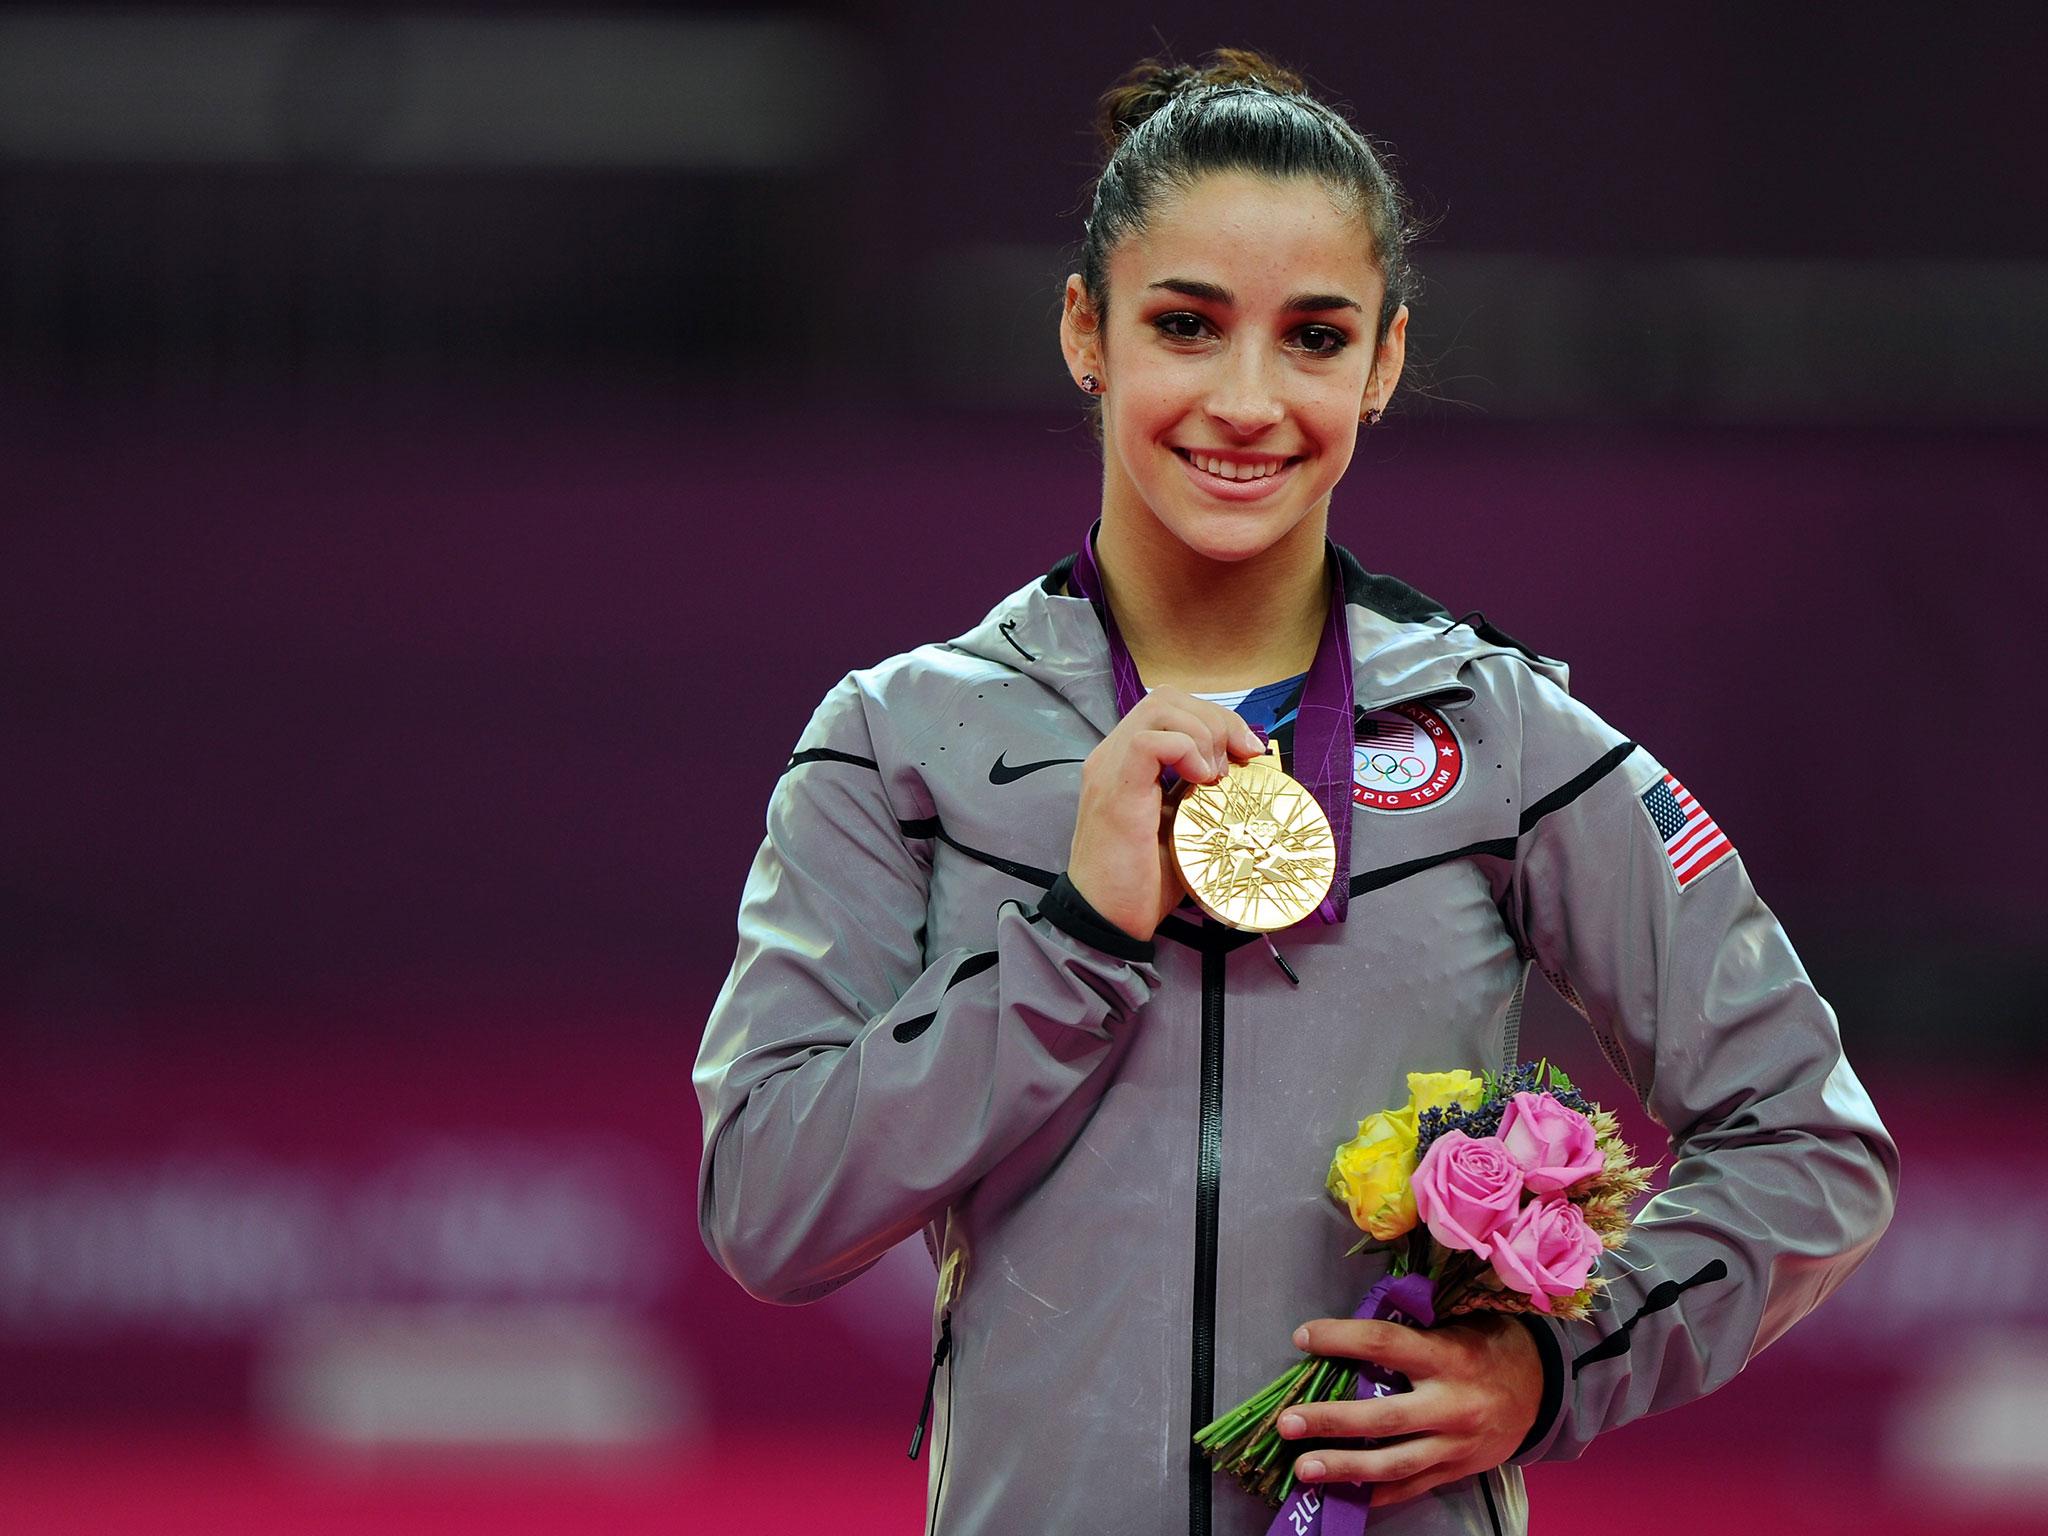 Aly Raisman was another USA Olympian to have been abused by Larry Nassar